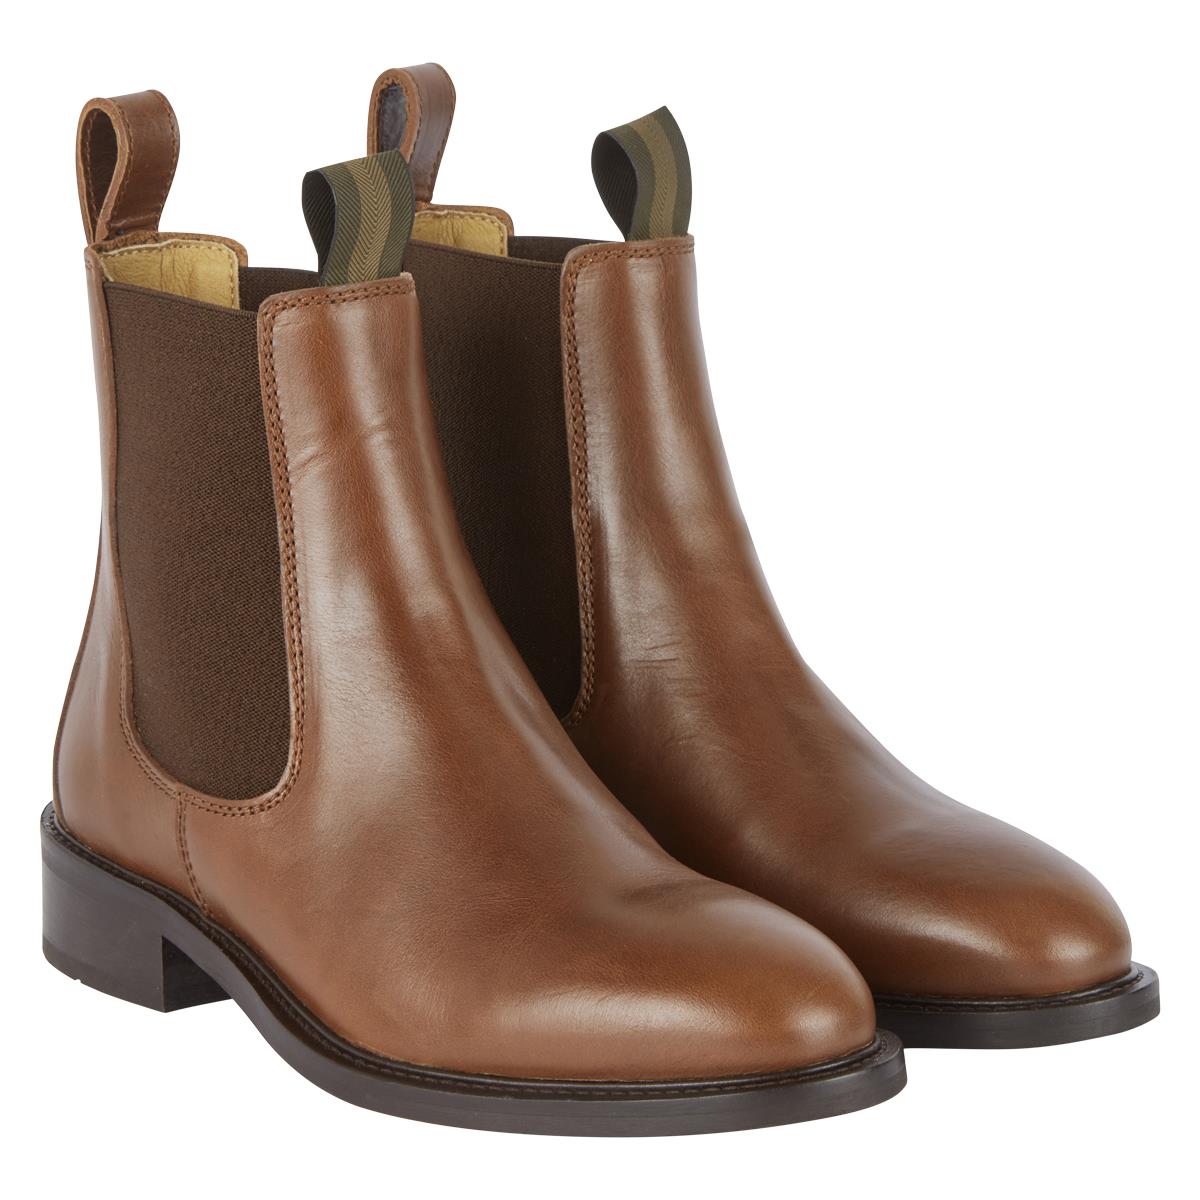 Is it possible to resole and reheel the Le Chameau Womens La Chelsea Cuir Boots?